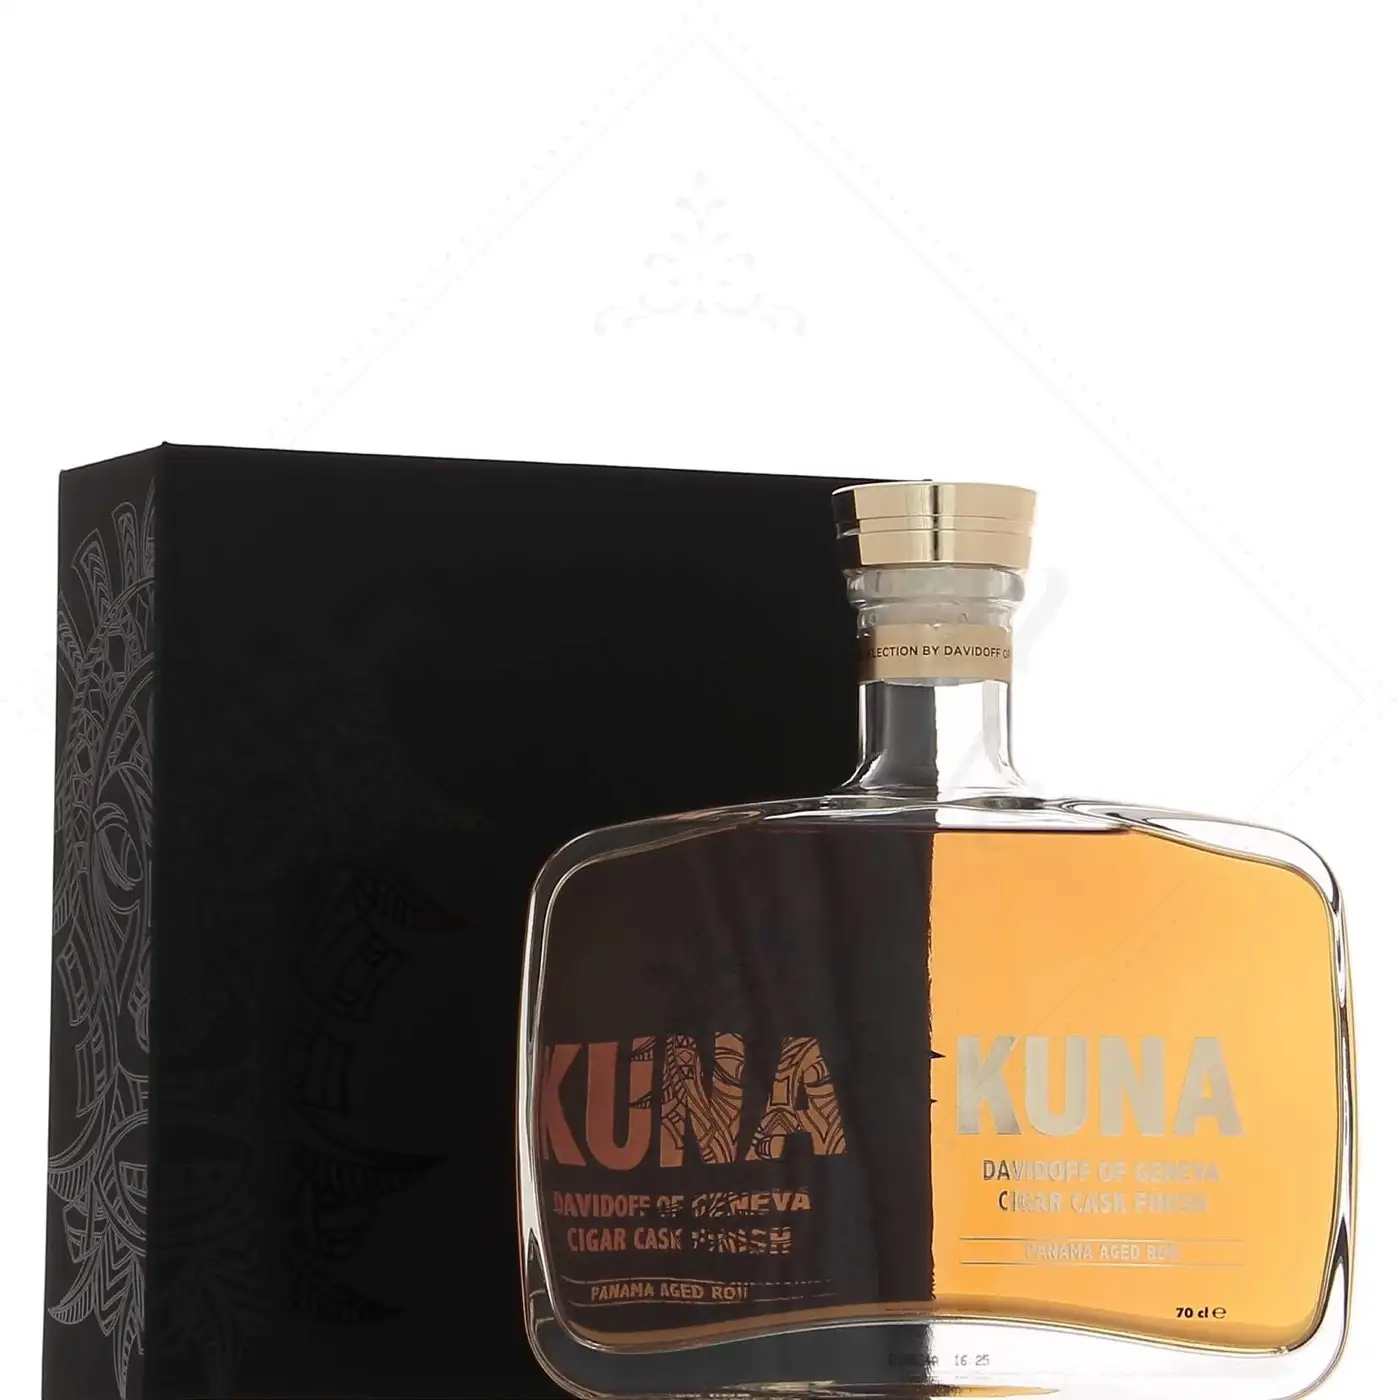 Image of the front of the bottle of the rum Kuna Davidoff Of Geneva Cigar Cask Finish